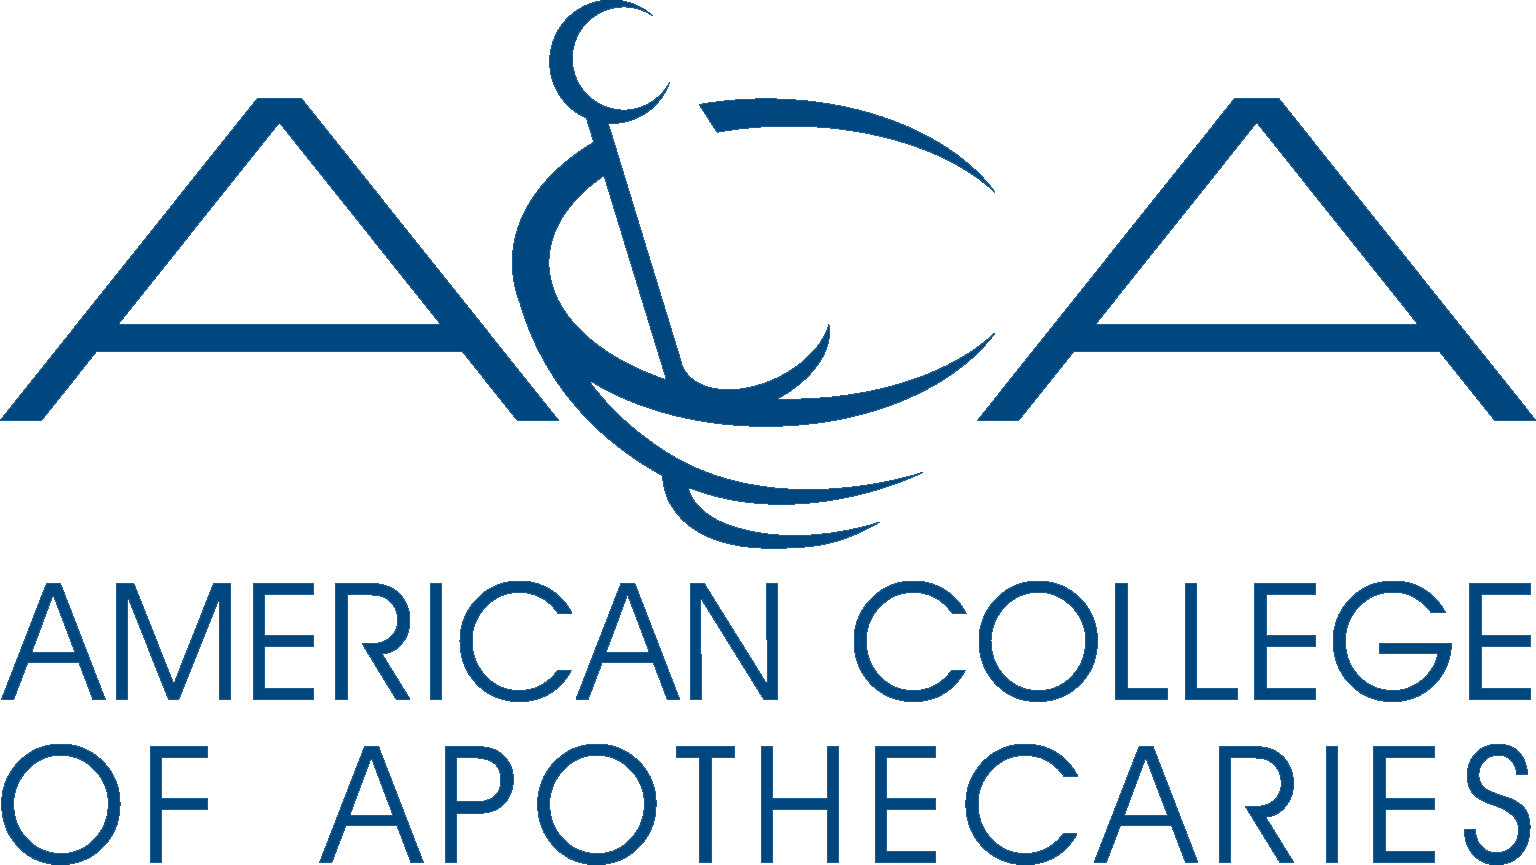 ACA (American College of Apothecaries)